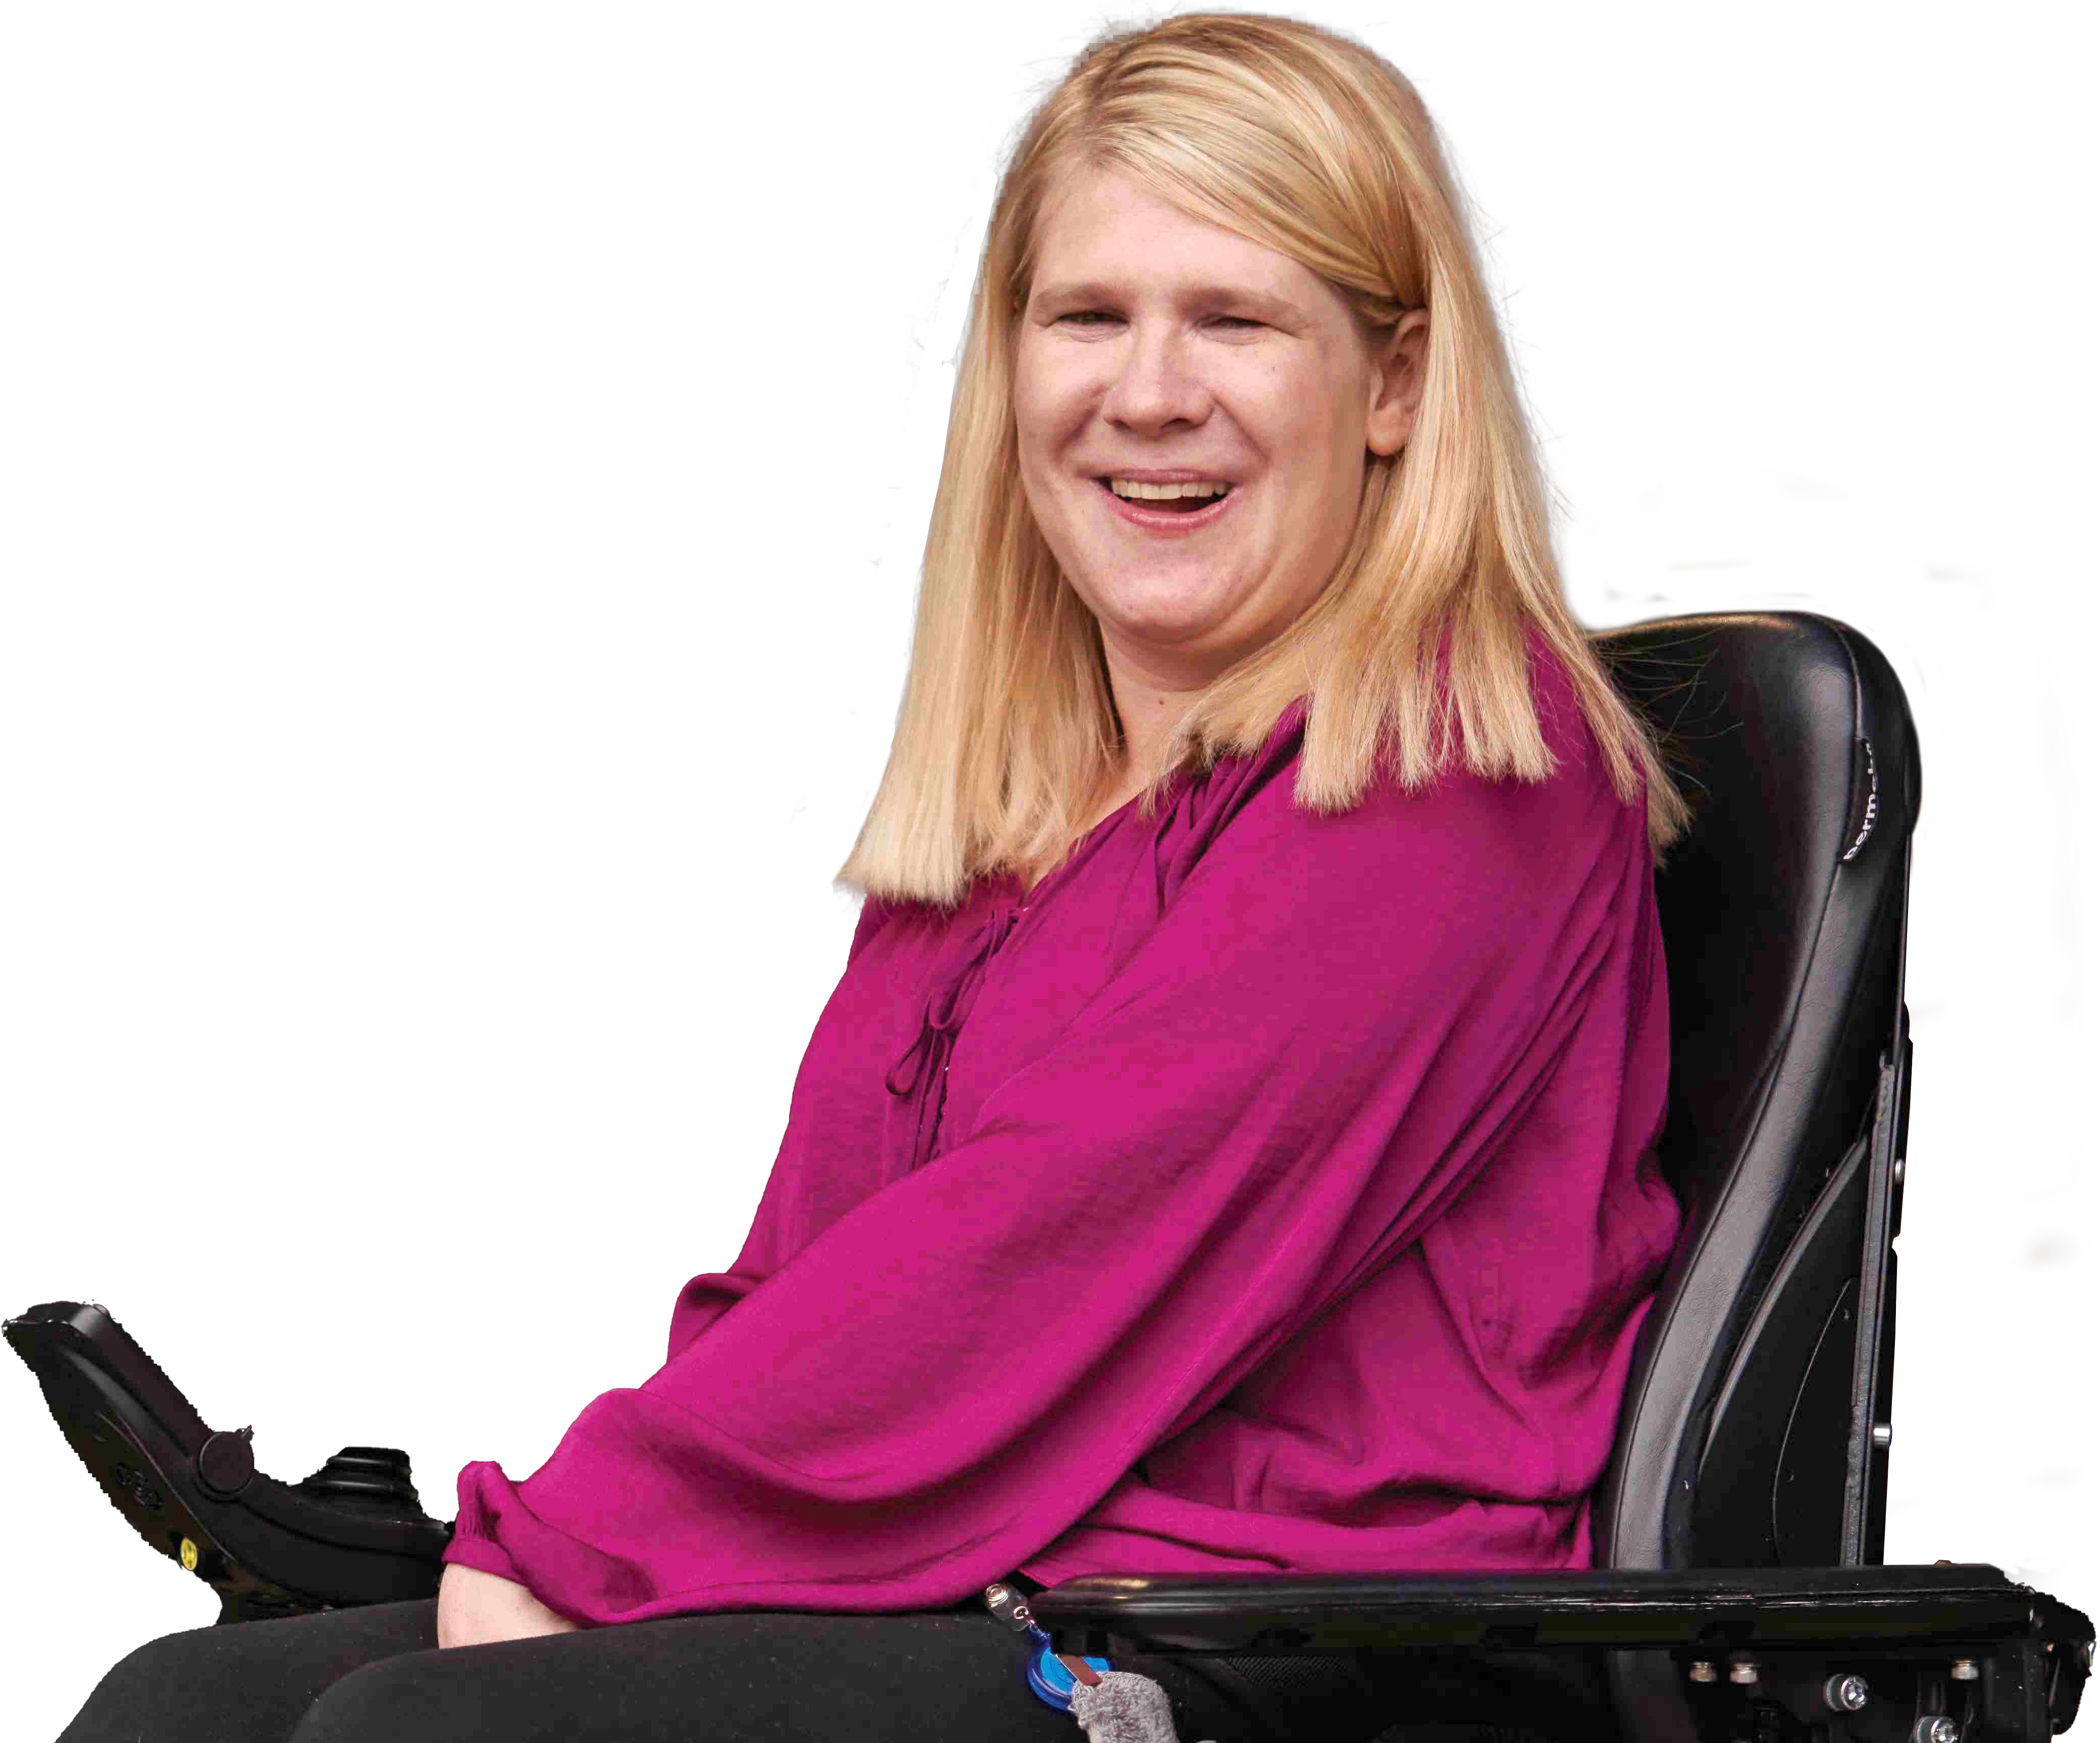 Woman wearing a pink shirt and sitting in a wheelchair